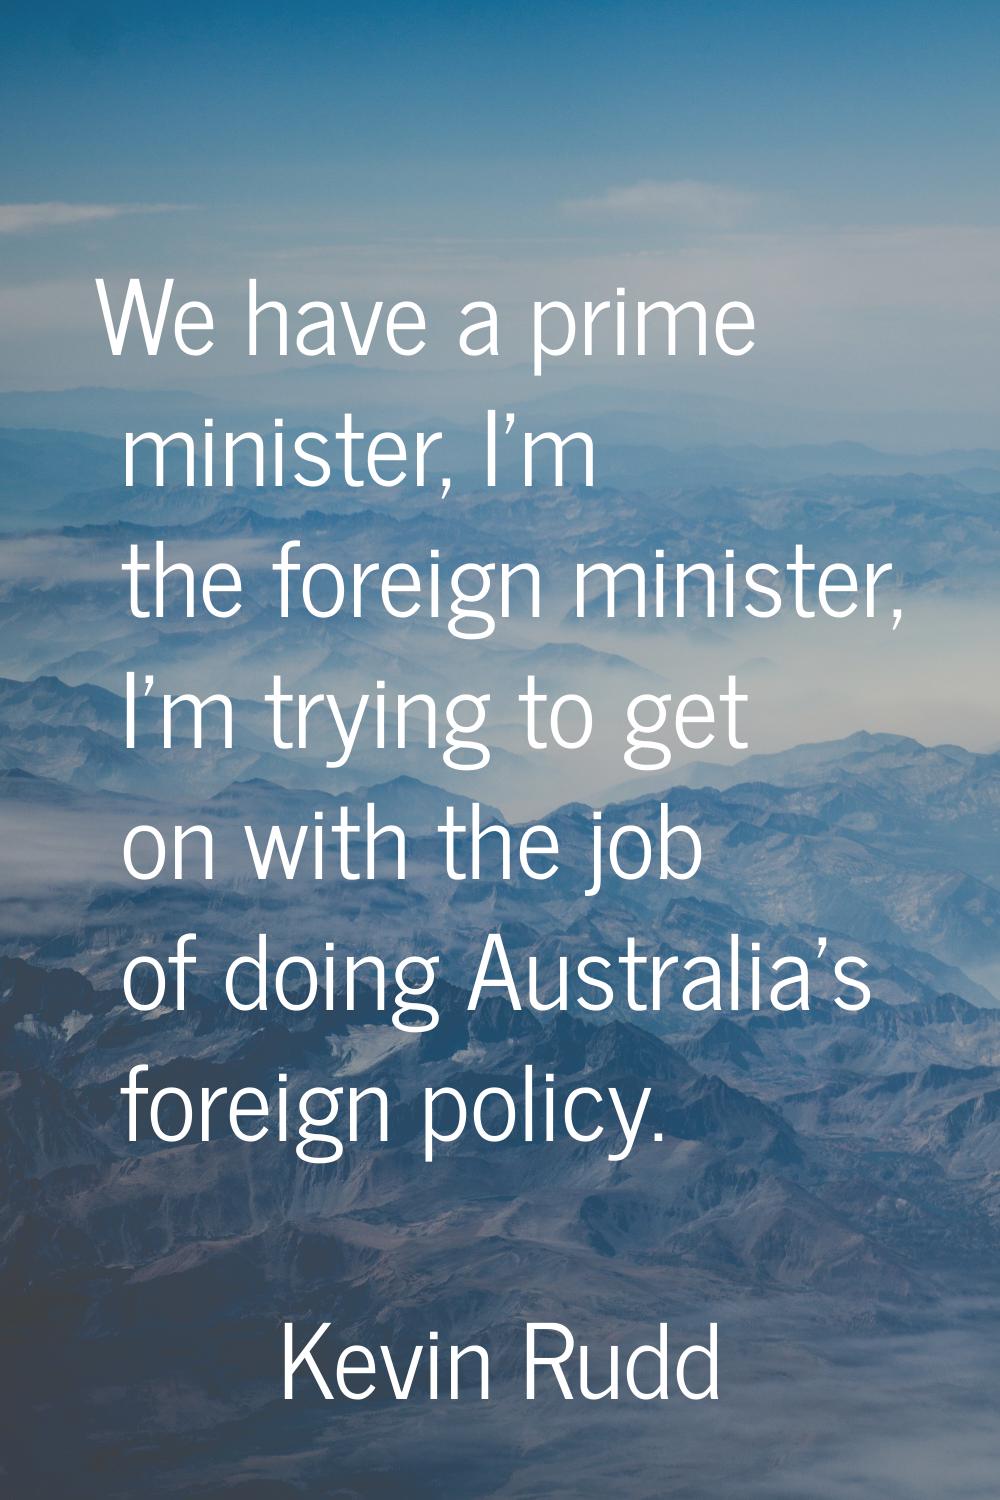 We have a prime minister, I'm the foreign minister, I'm trying to get on with the job of doing Aust